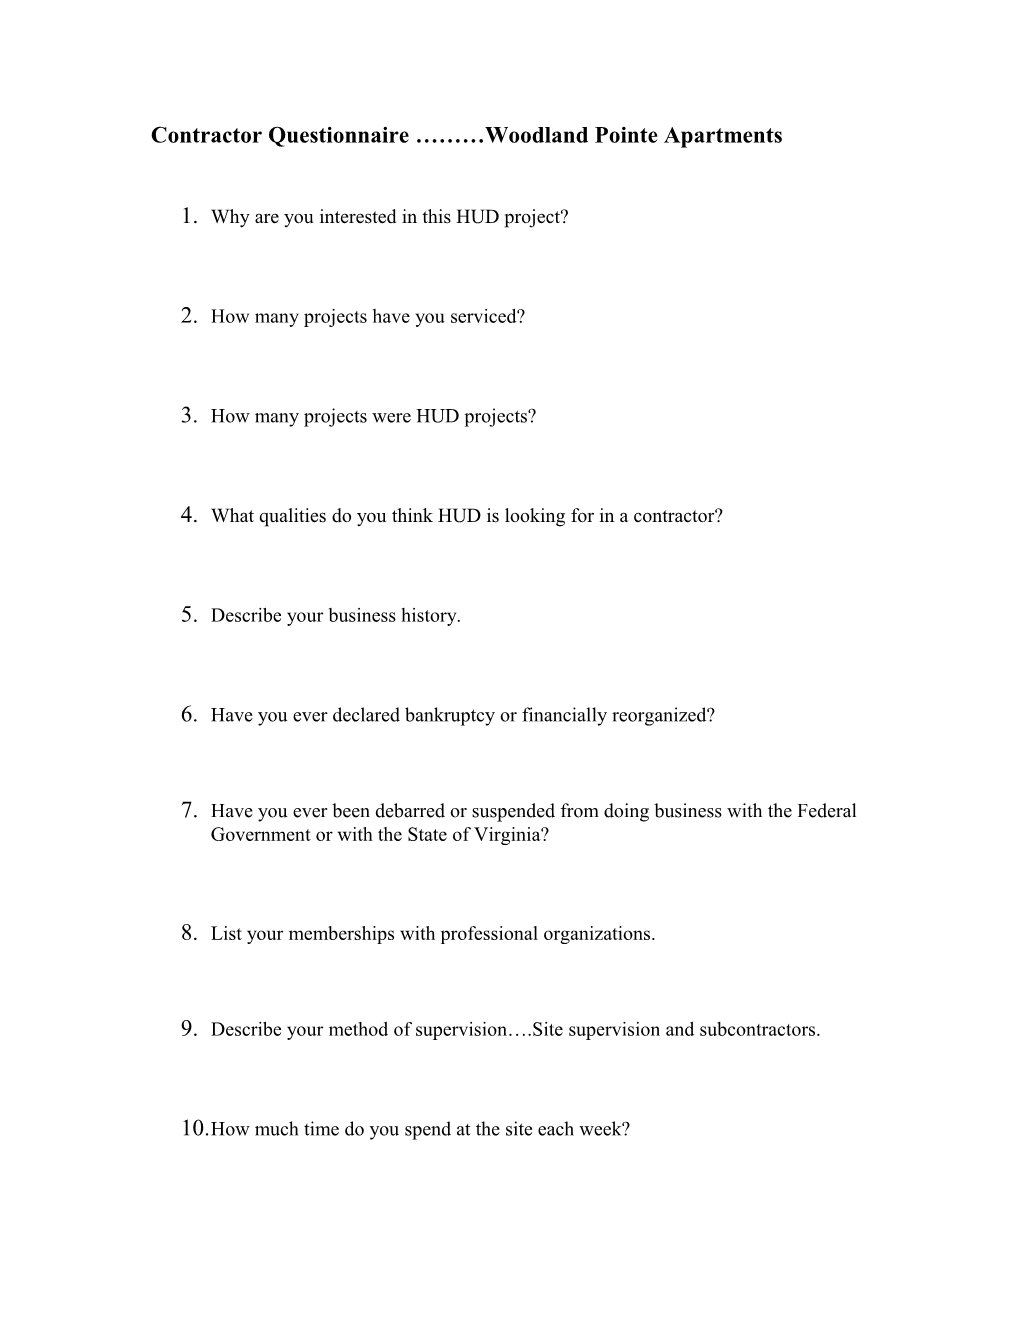 Interview Questions for Contractor Woodland Pointe